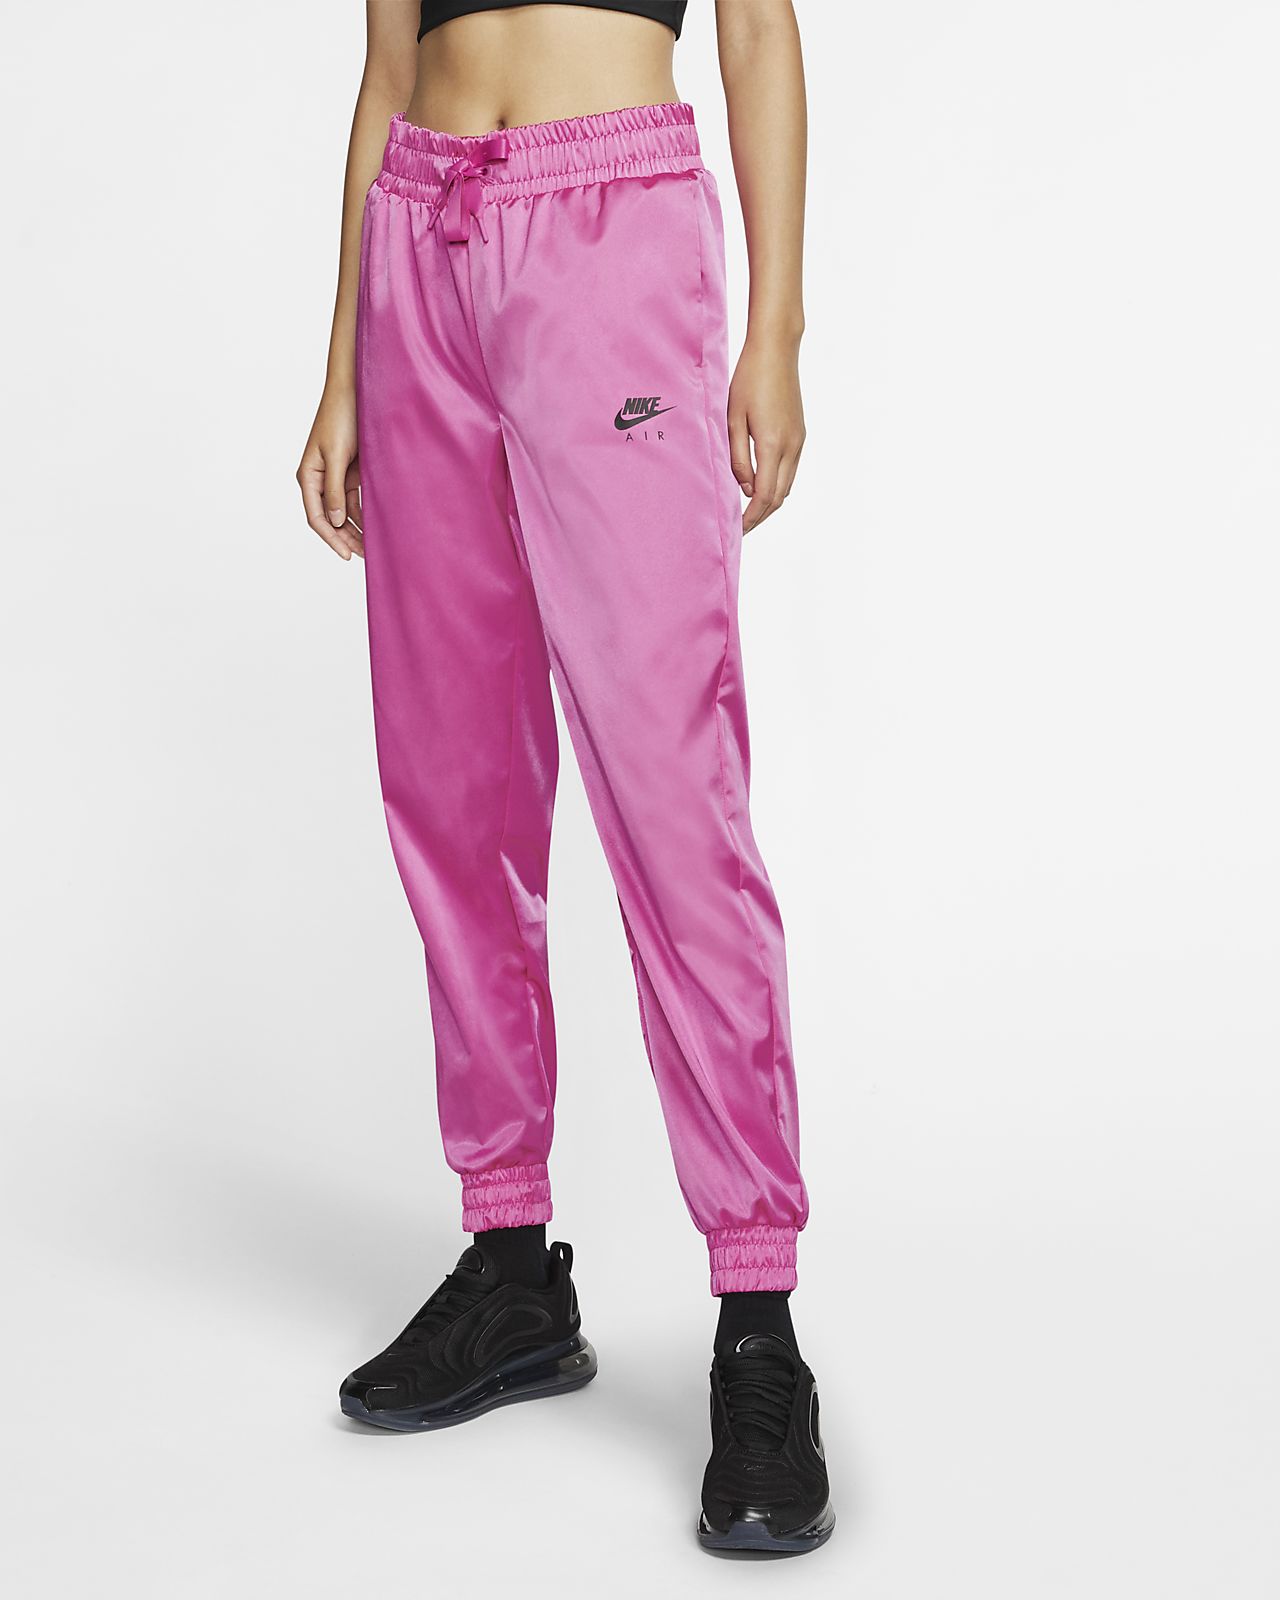 black pink and blue nike tracksuit